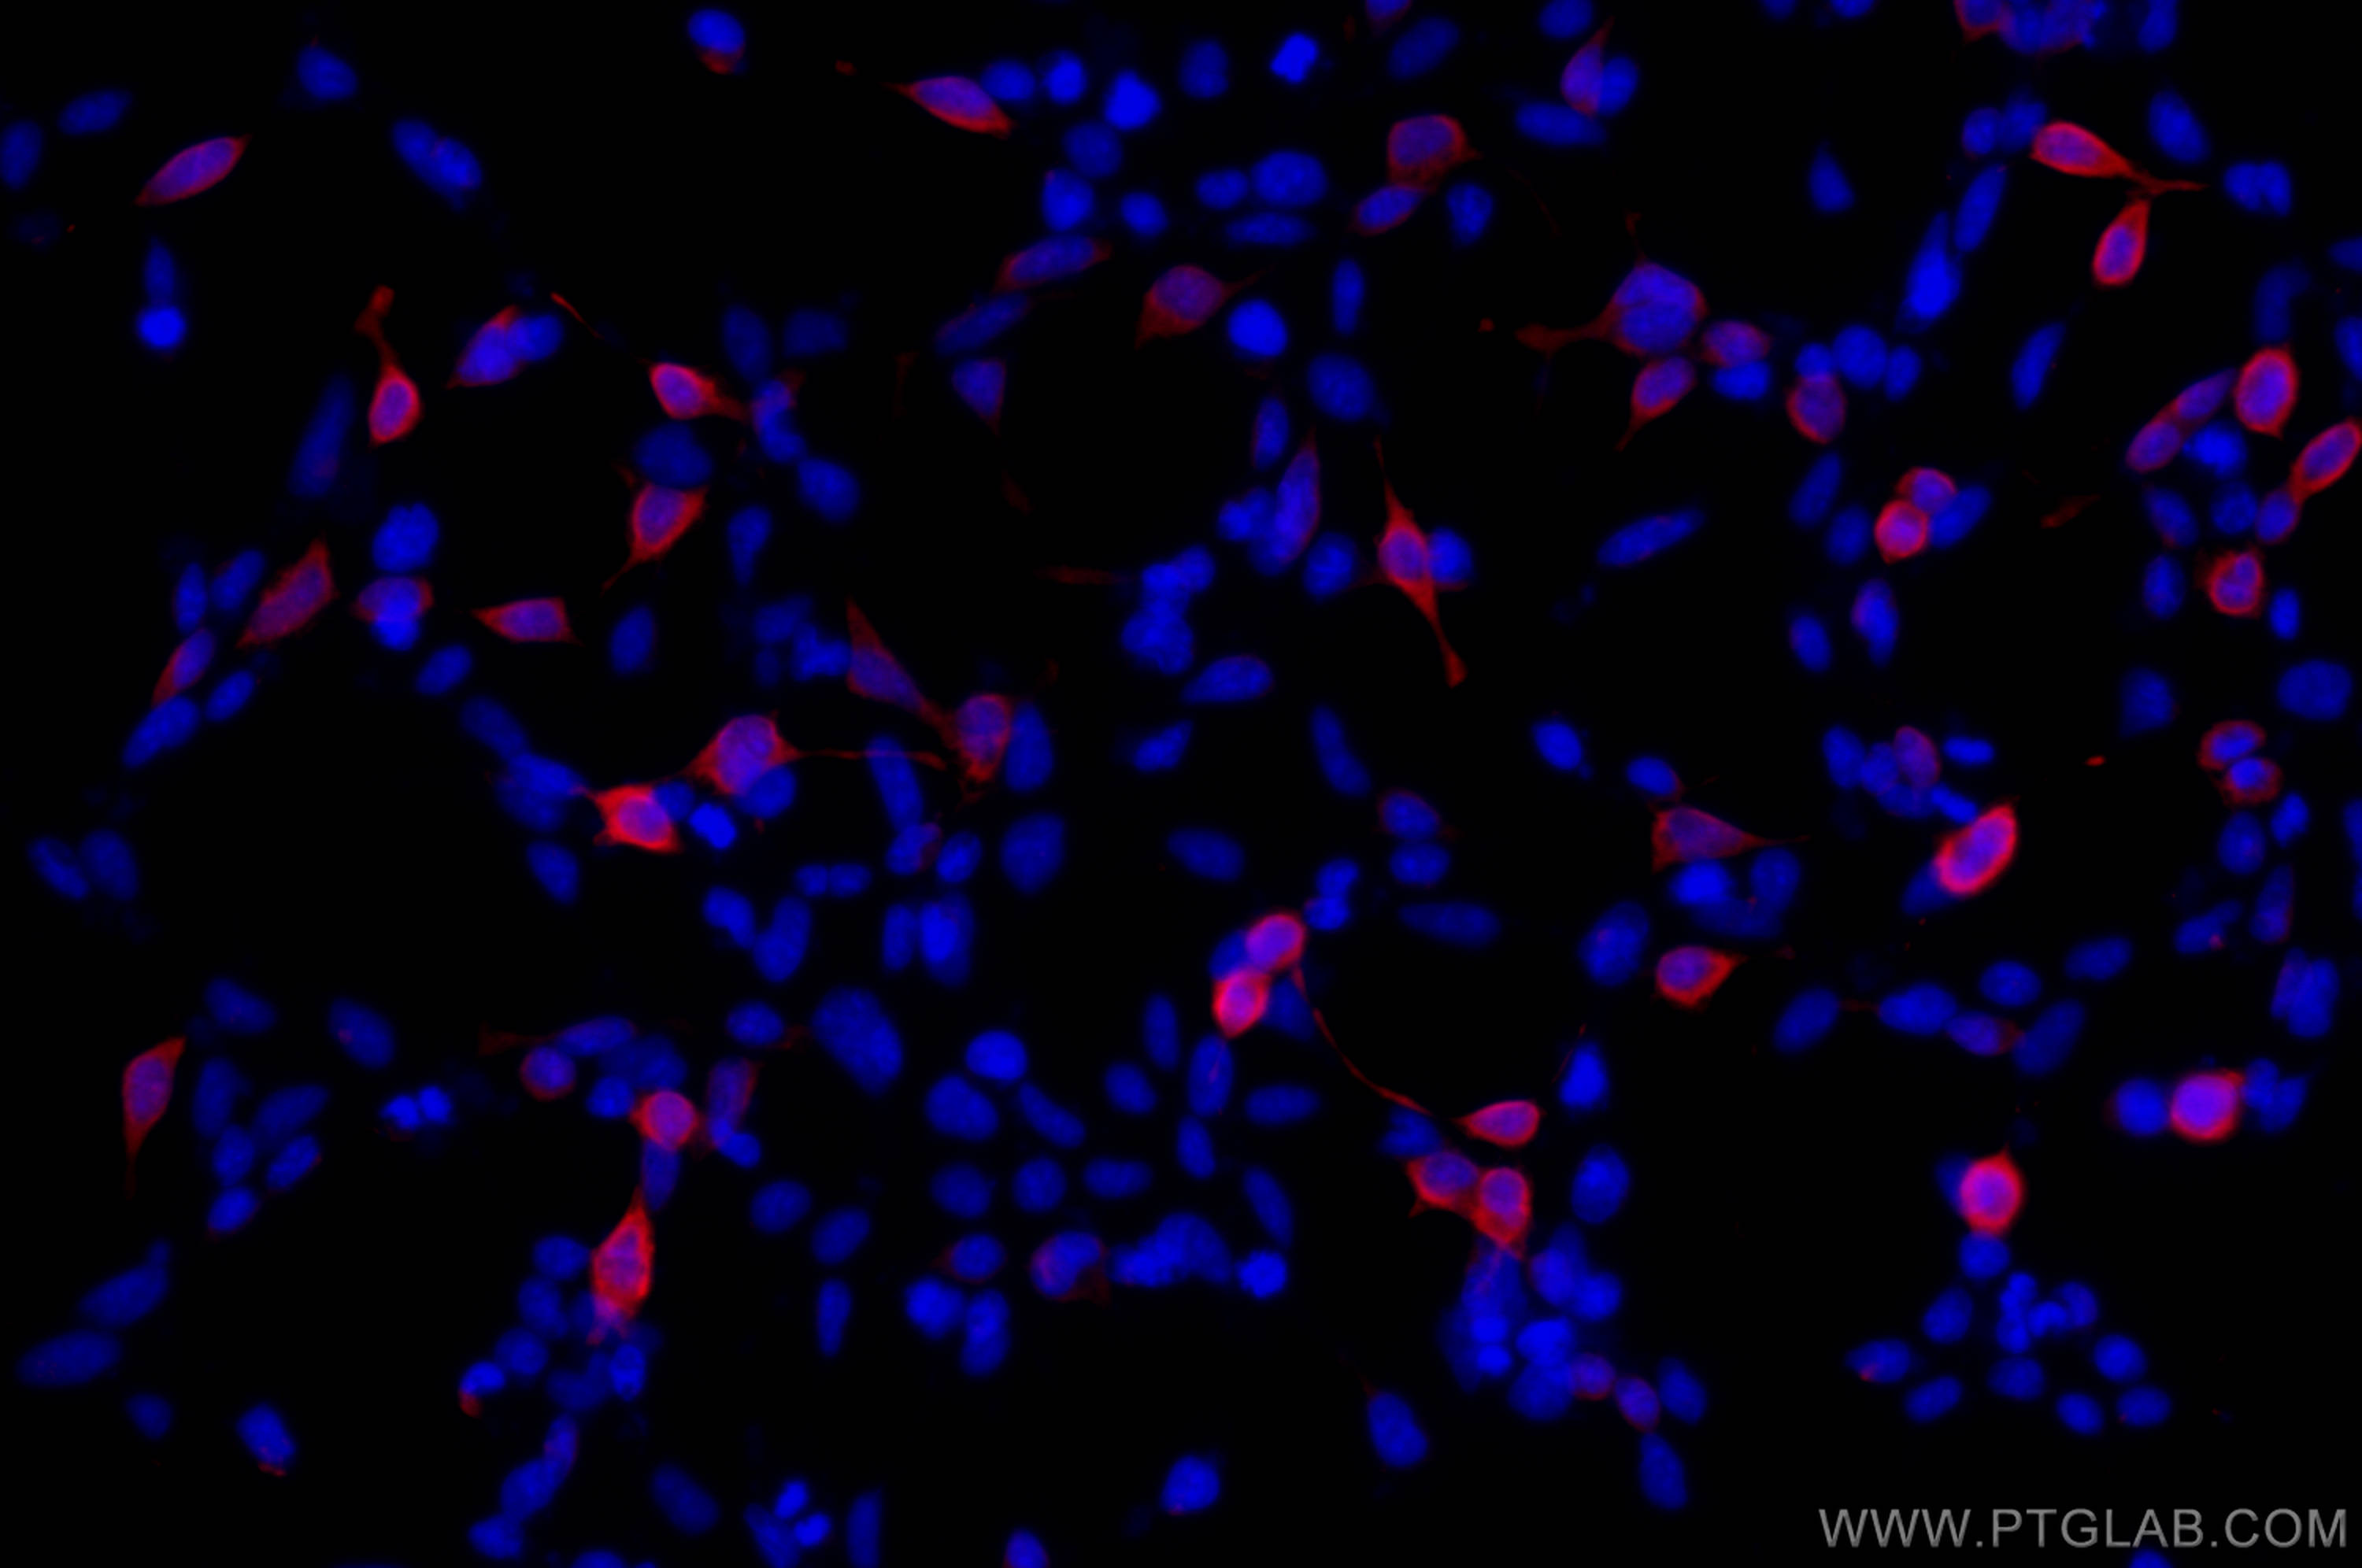 Immunofluorescence (IF) / fluorescent staining of Transfected HEK-293 cells using GFP tag Monoclonal antibody (66002-1-Ig)